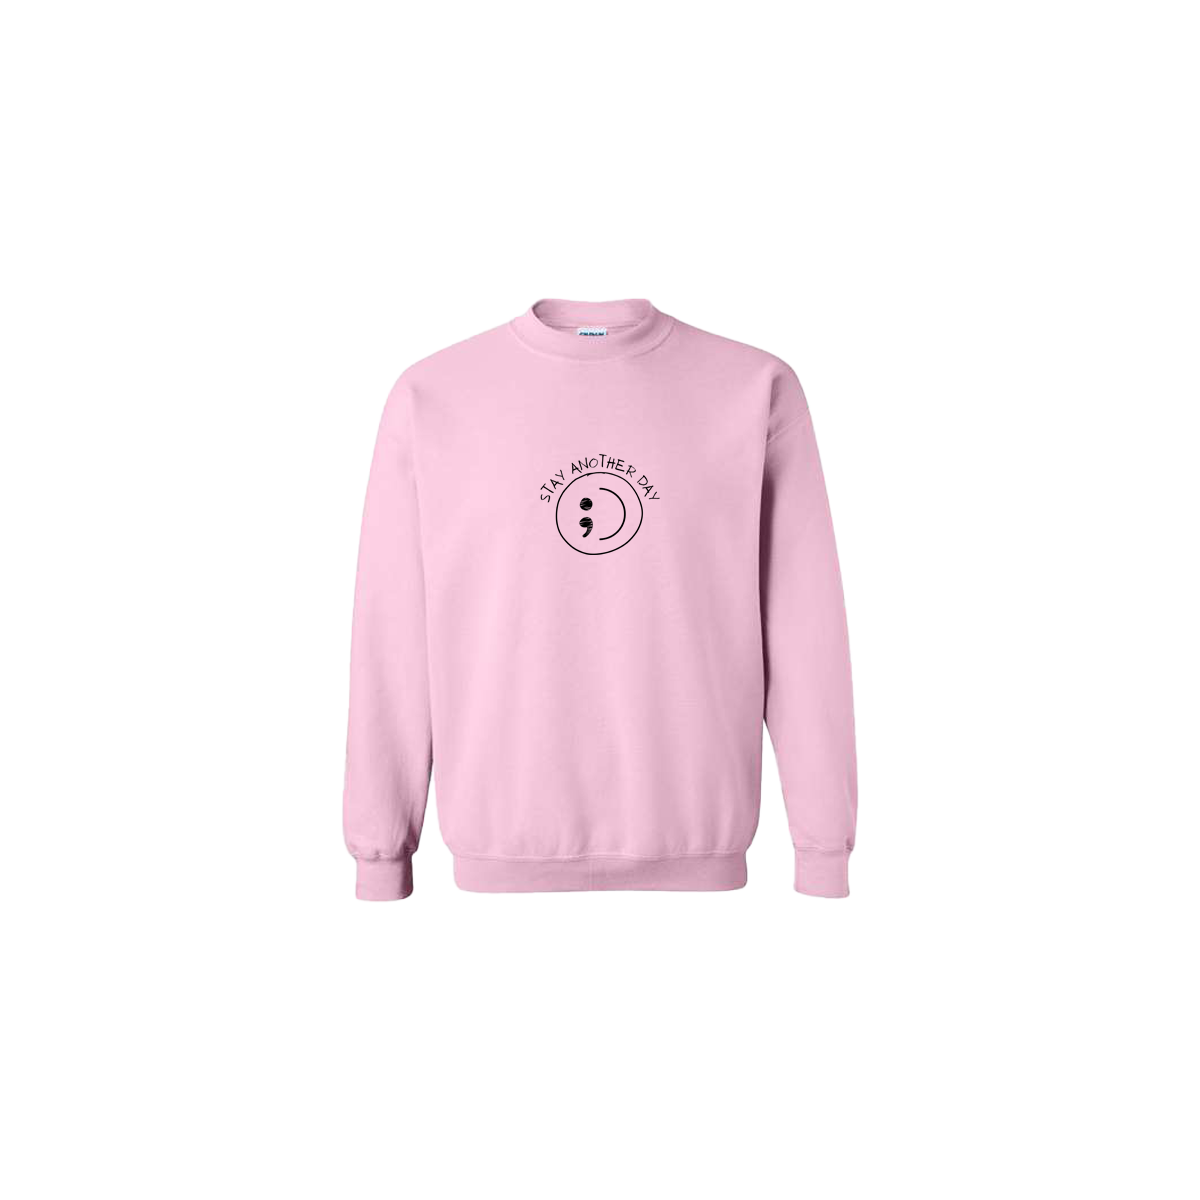 Stay Another Day Smiley Face Embroidered Light Pink Crewneck - Mental Health Awareness Clothing